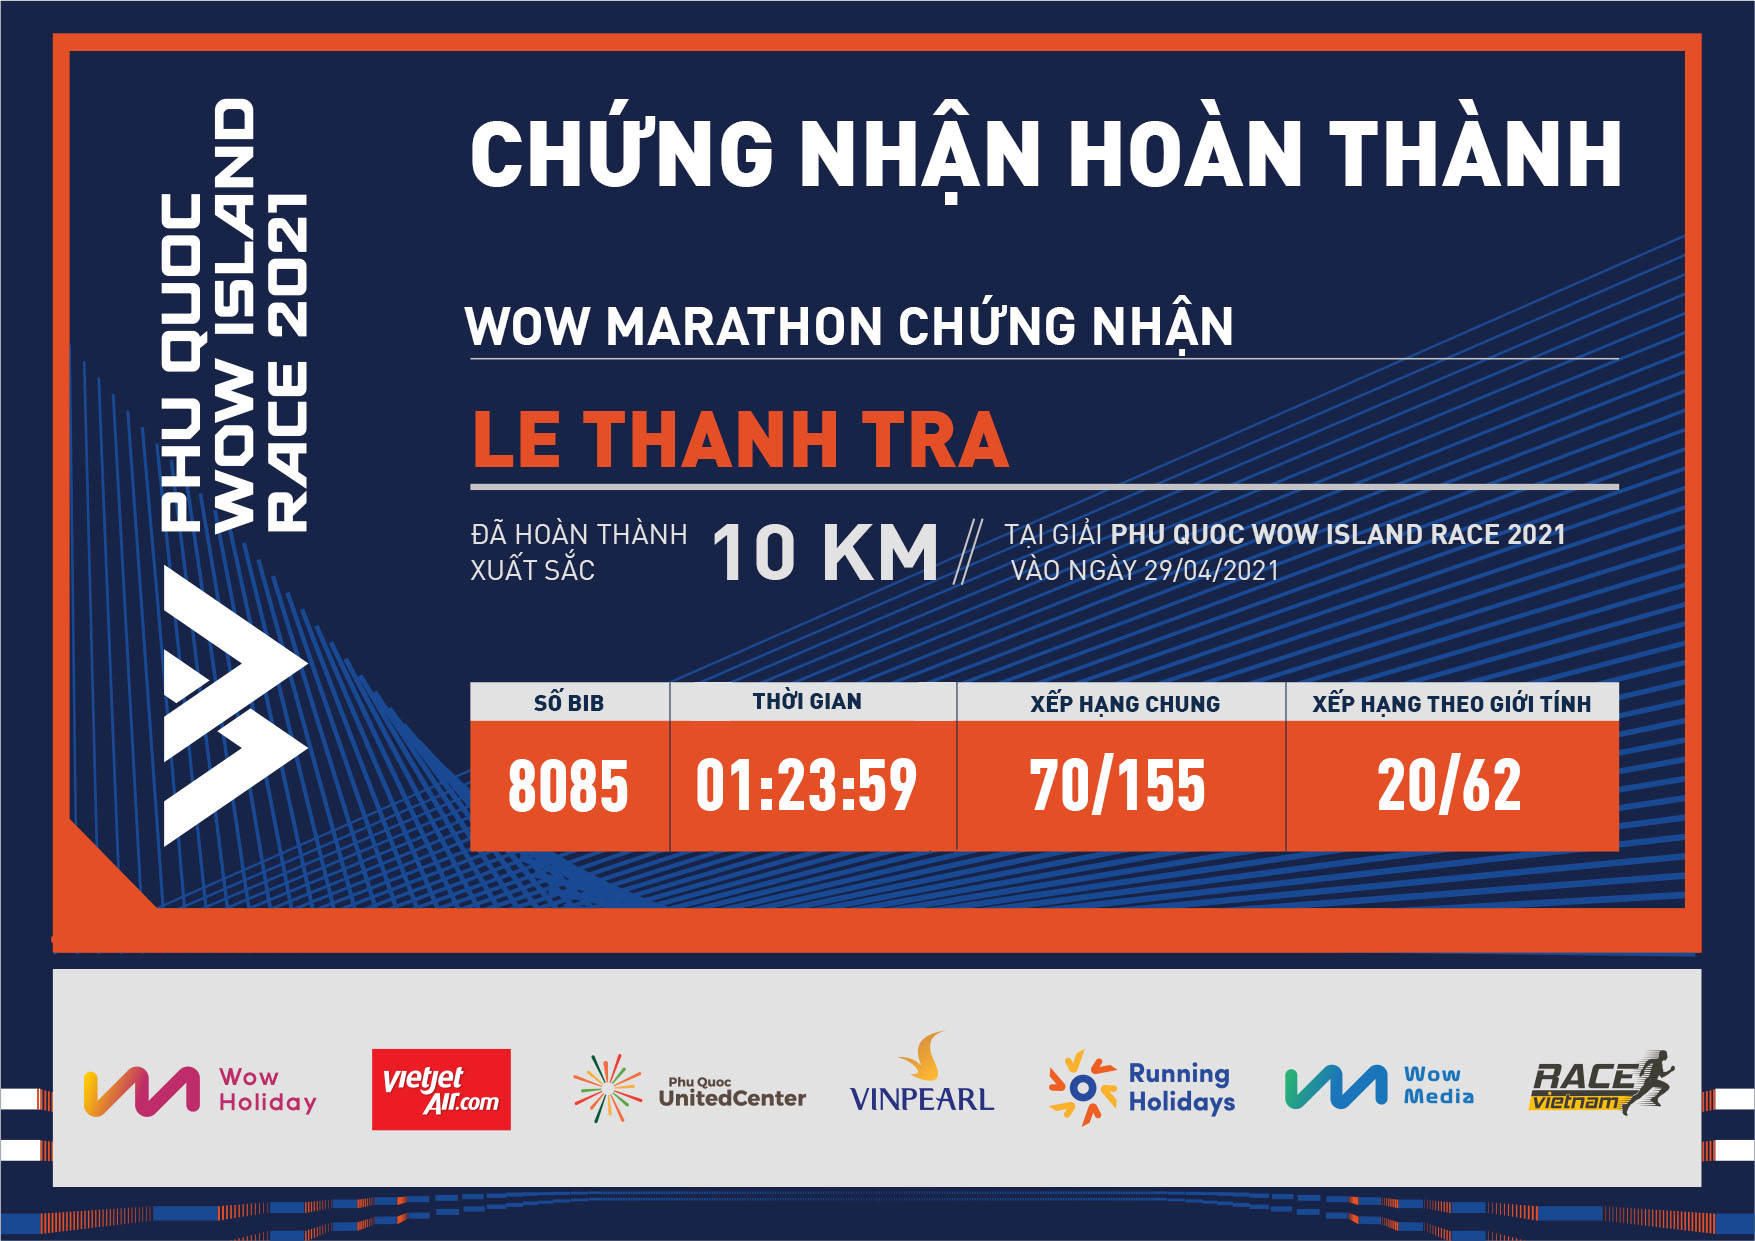 8085 - Le Thanh tra